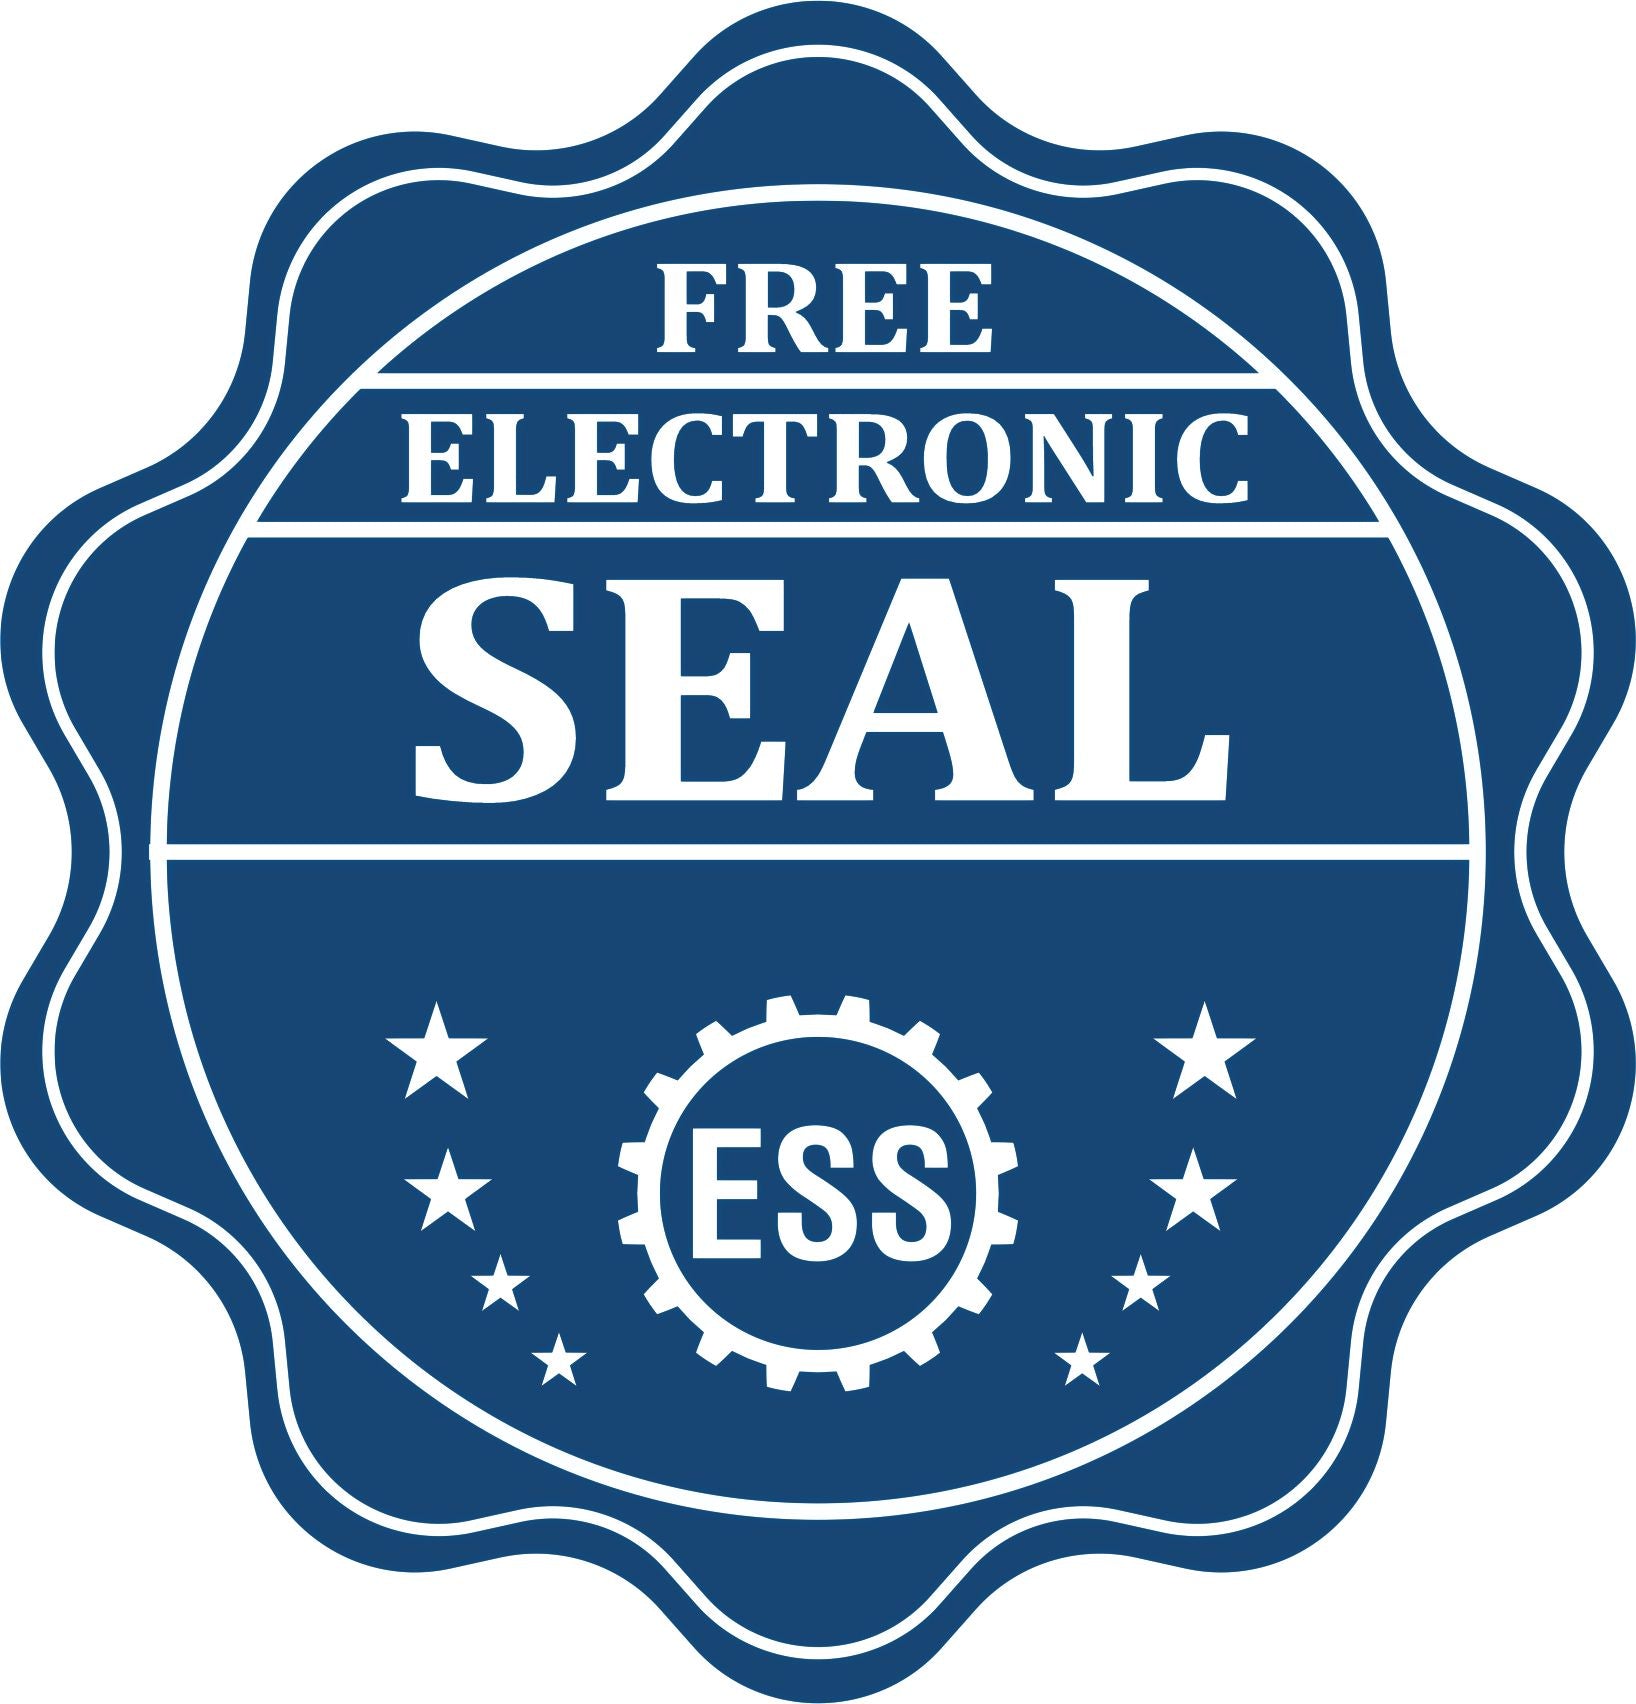 A badge showing a free electronic seal for the Heavy Duty Cast Iron Iowa Architect Embosser with stars and the ESS gear on the emblem.